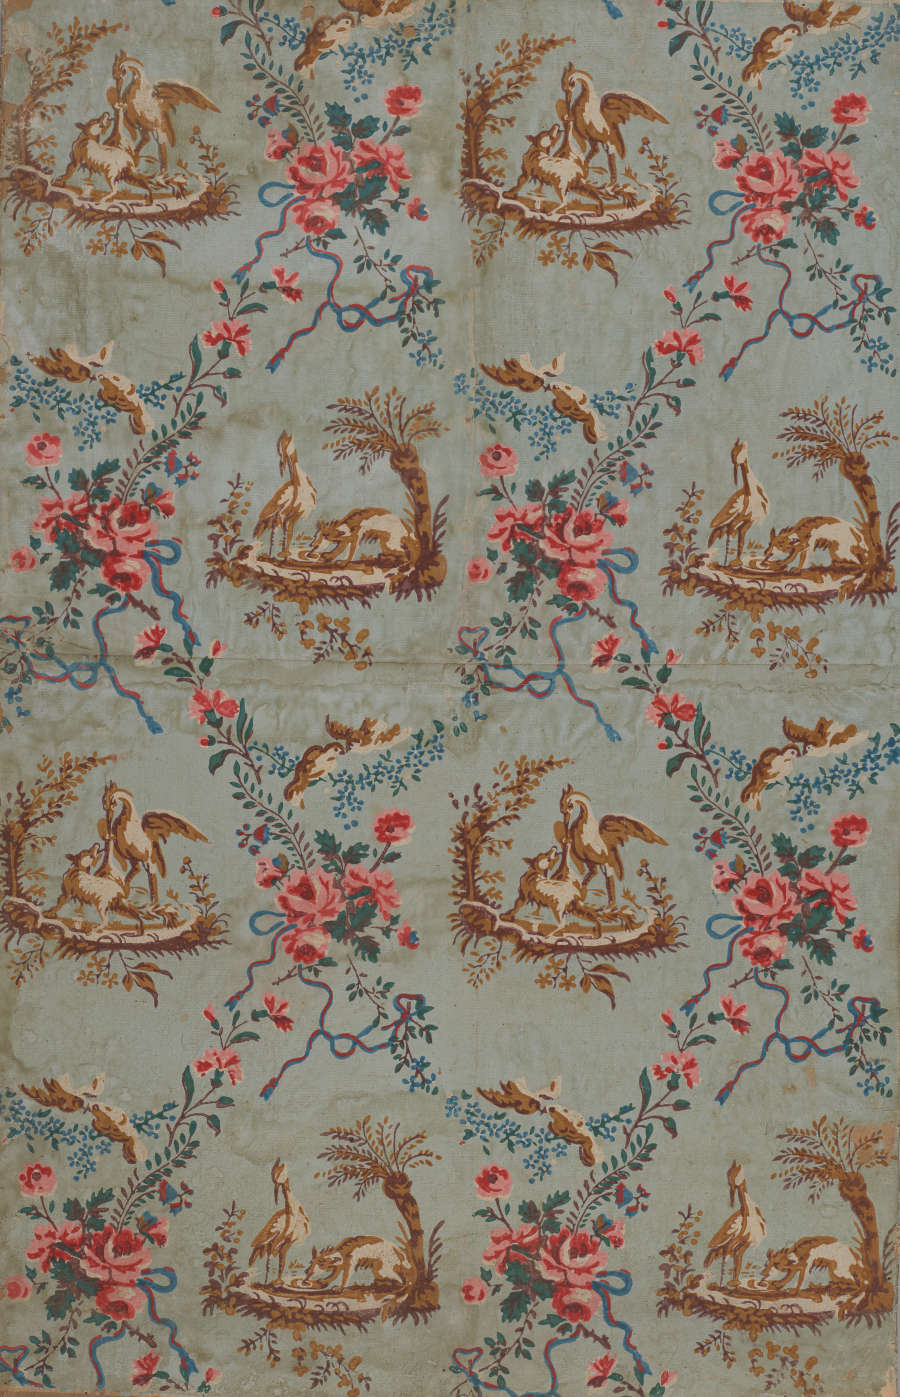 Segment of vintage wallpaper featuring a pattern of repeating brown illustrations of wildlife in nature, surrounded by vibrant, decorative floral chains and foliage motifs; set on a faded blue background.